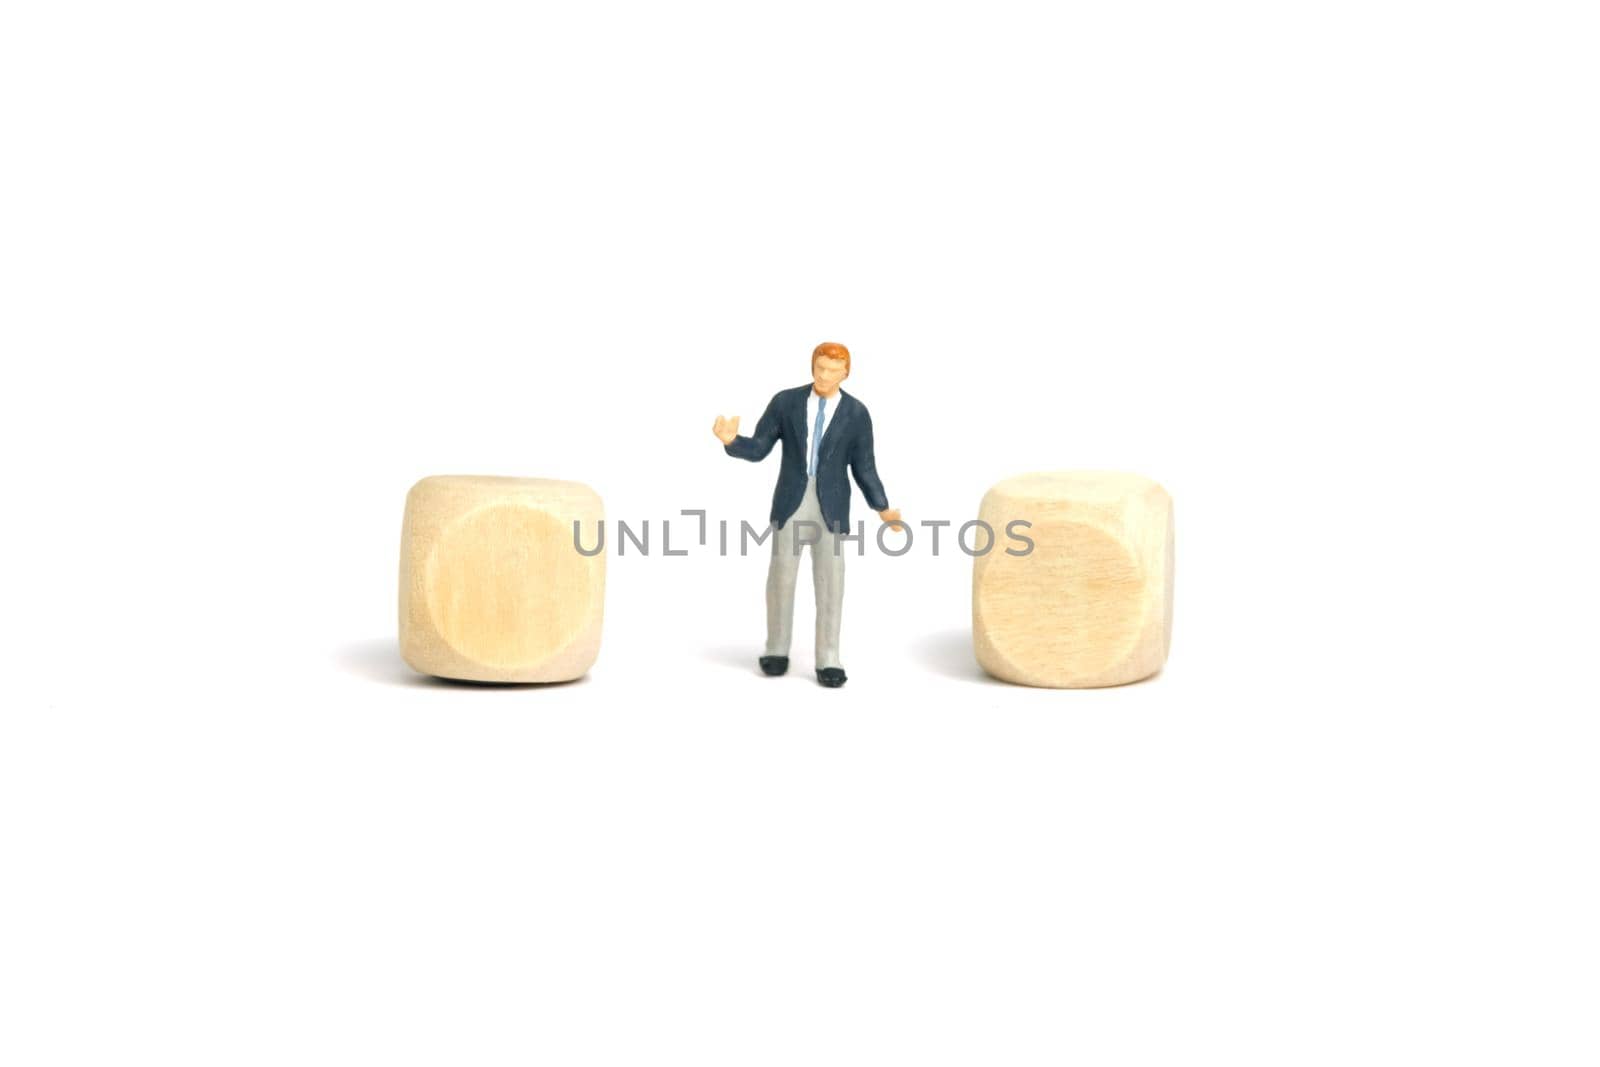 Miniature people toy figure photography. A shrugging businessman standing in the middle of two blank wooden dice. Isolated on white background. Image photo